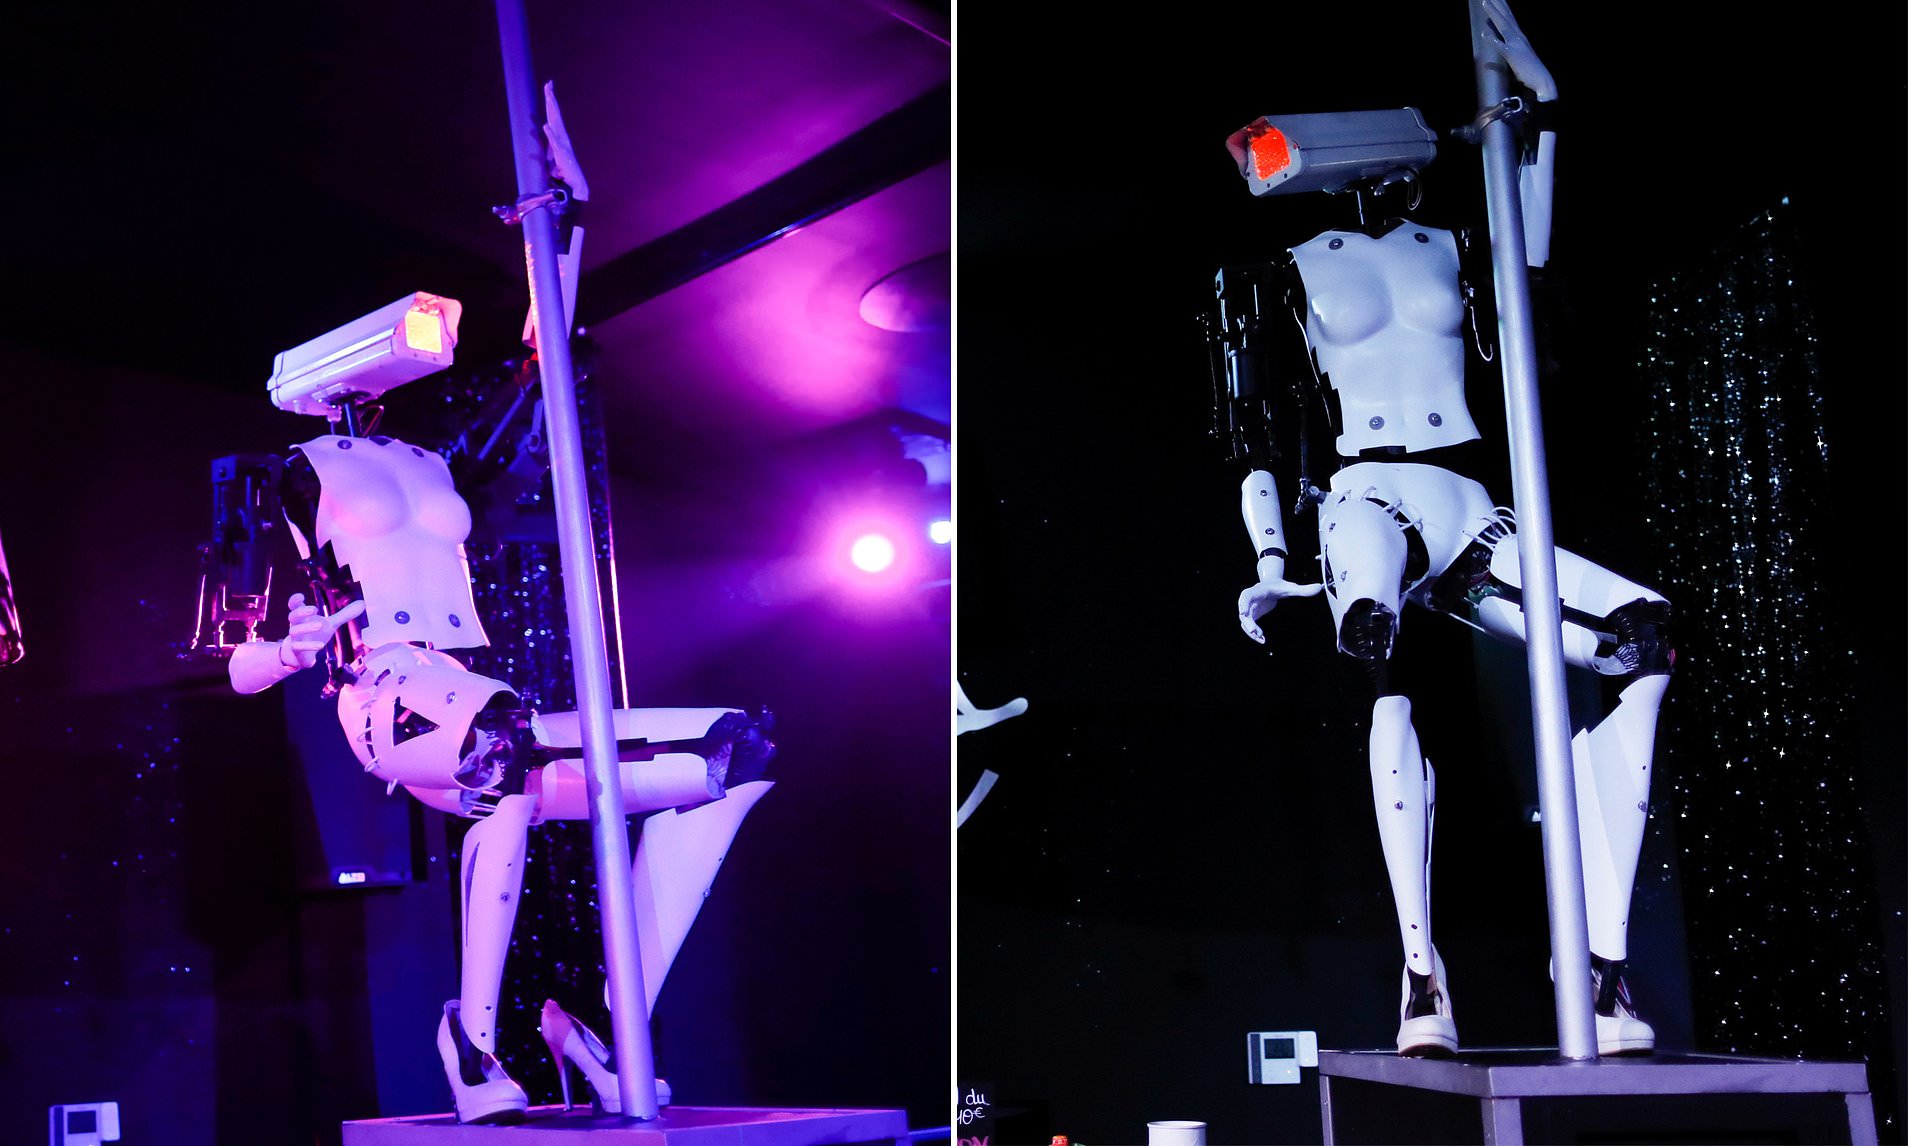 Robot Pole Dancers By Giles Walker Will Be Debuting At The SC-Club